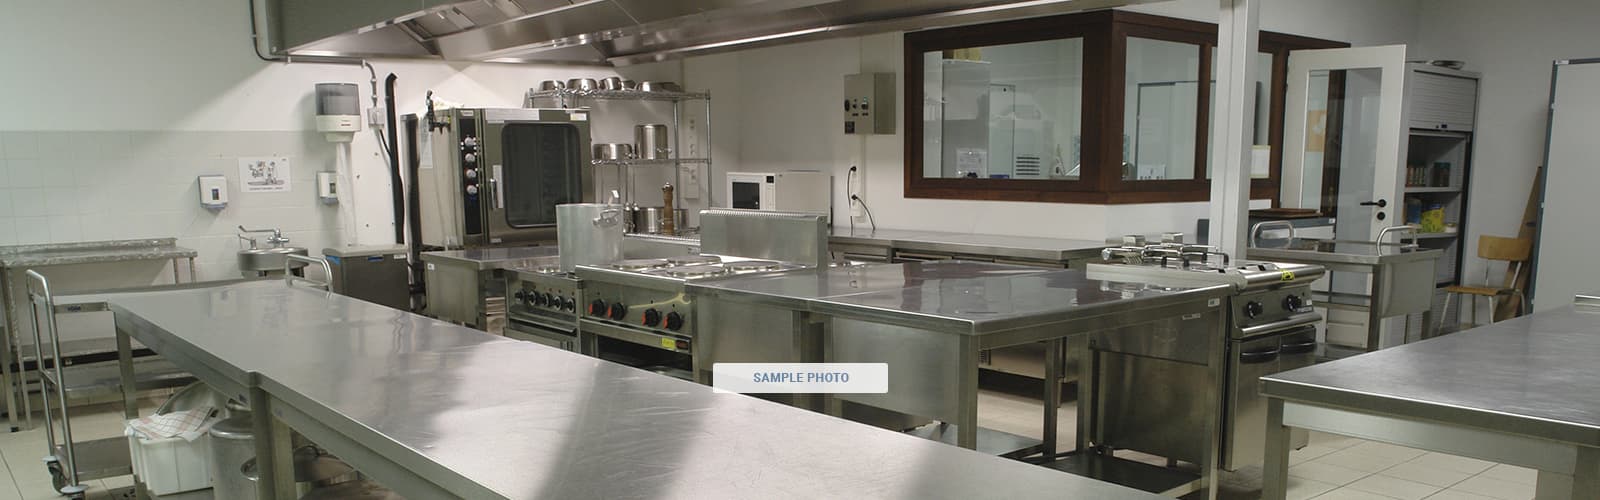 South Valley Middle School Kitchen (H37) in Gilroy California - Kitchen is located in the multi-pur